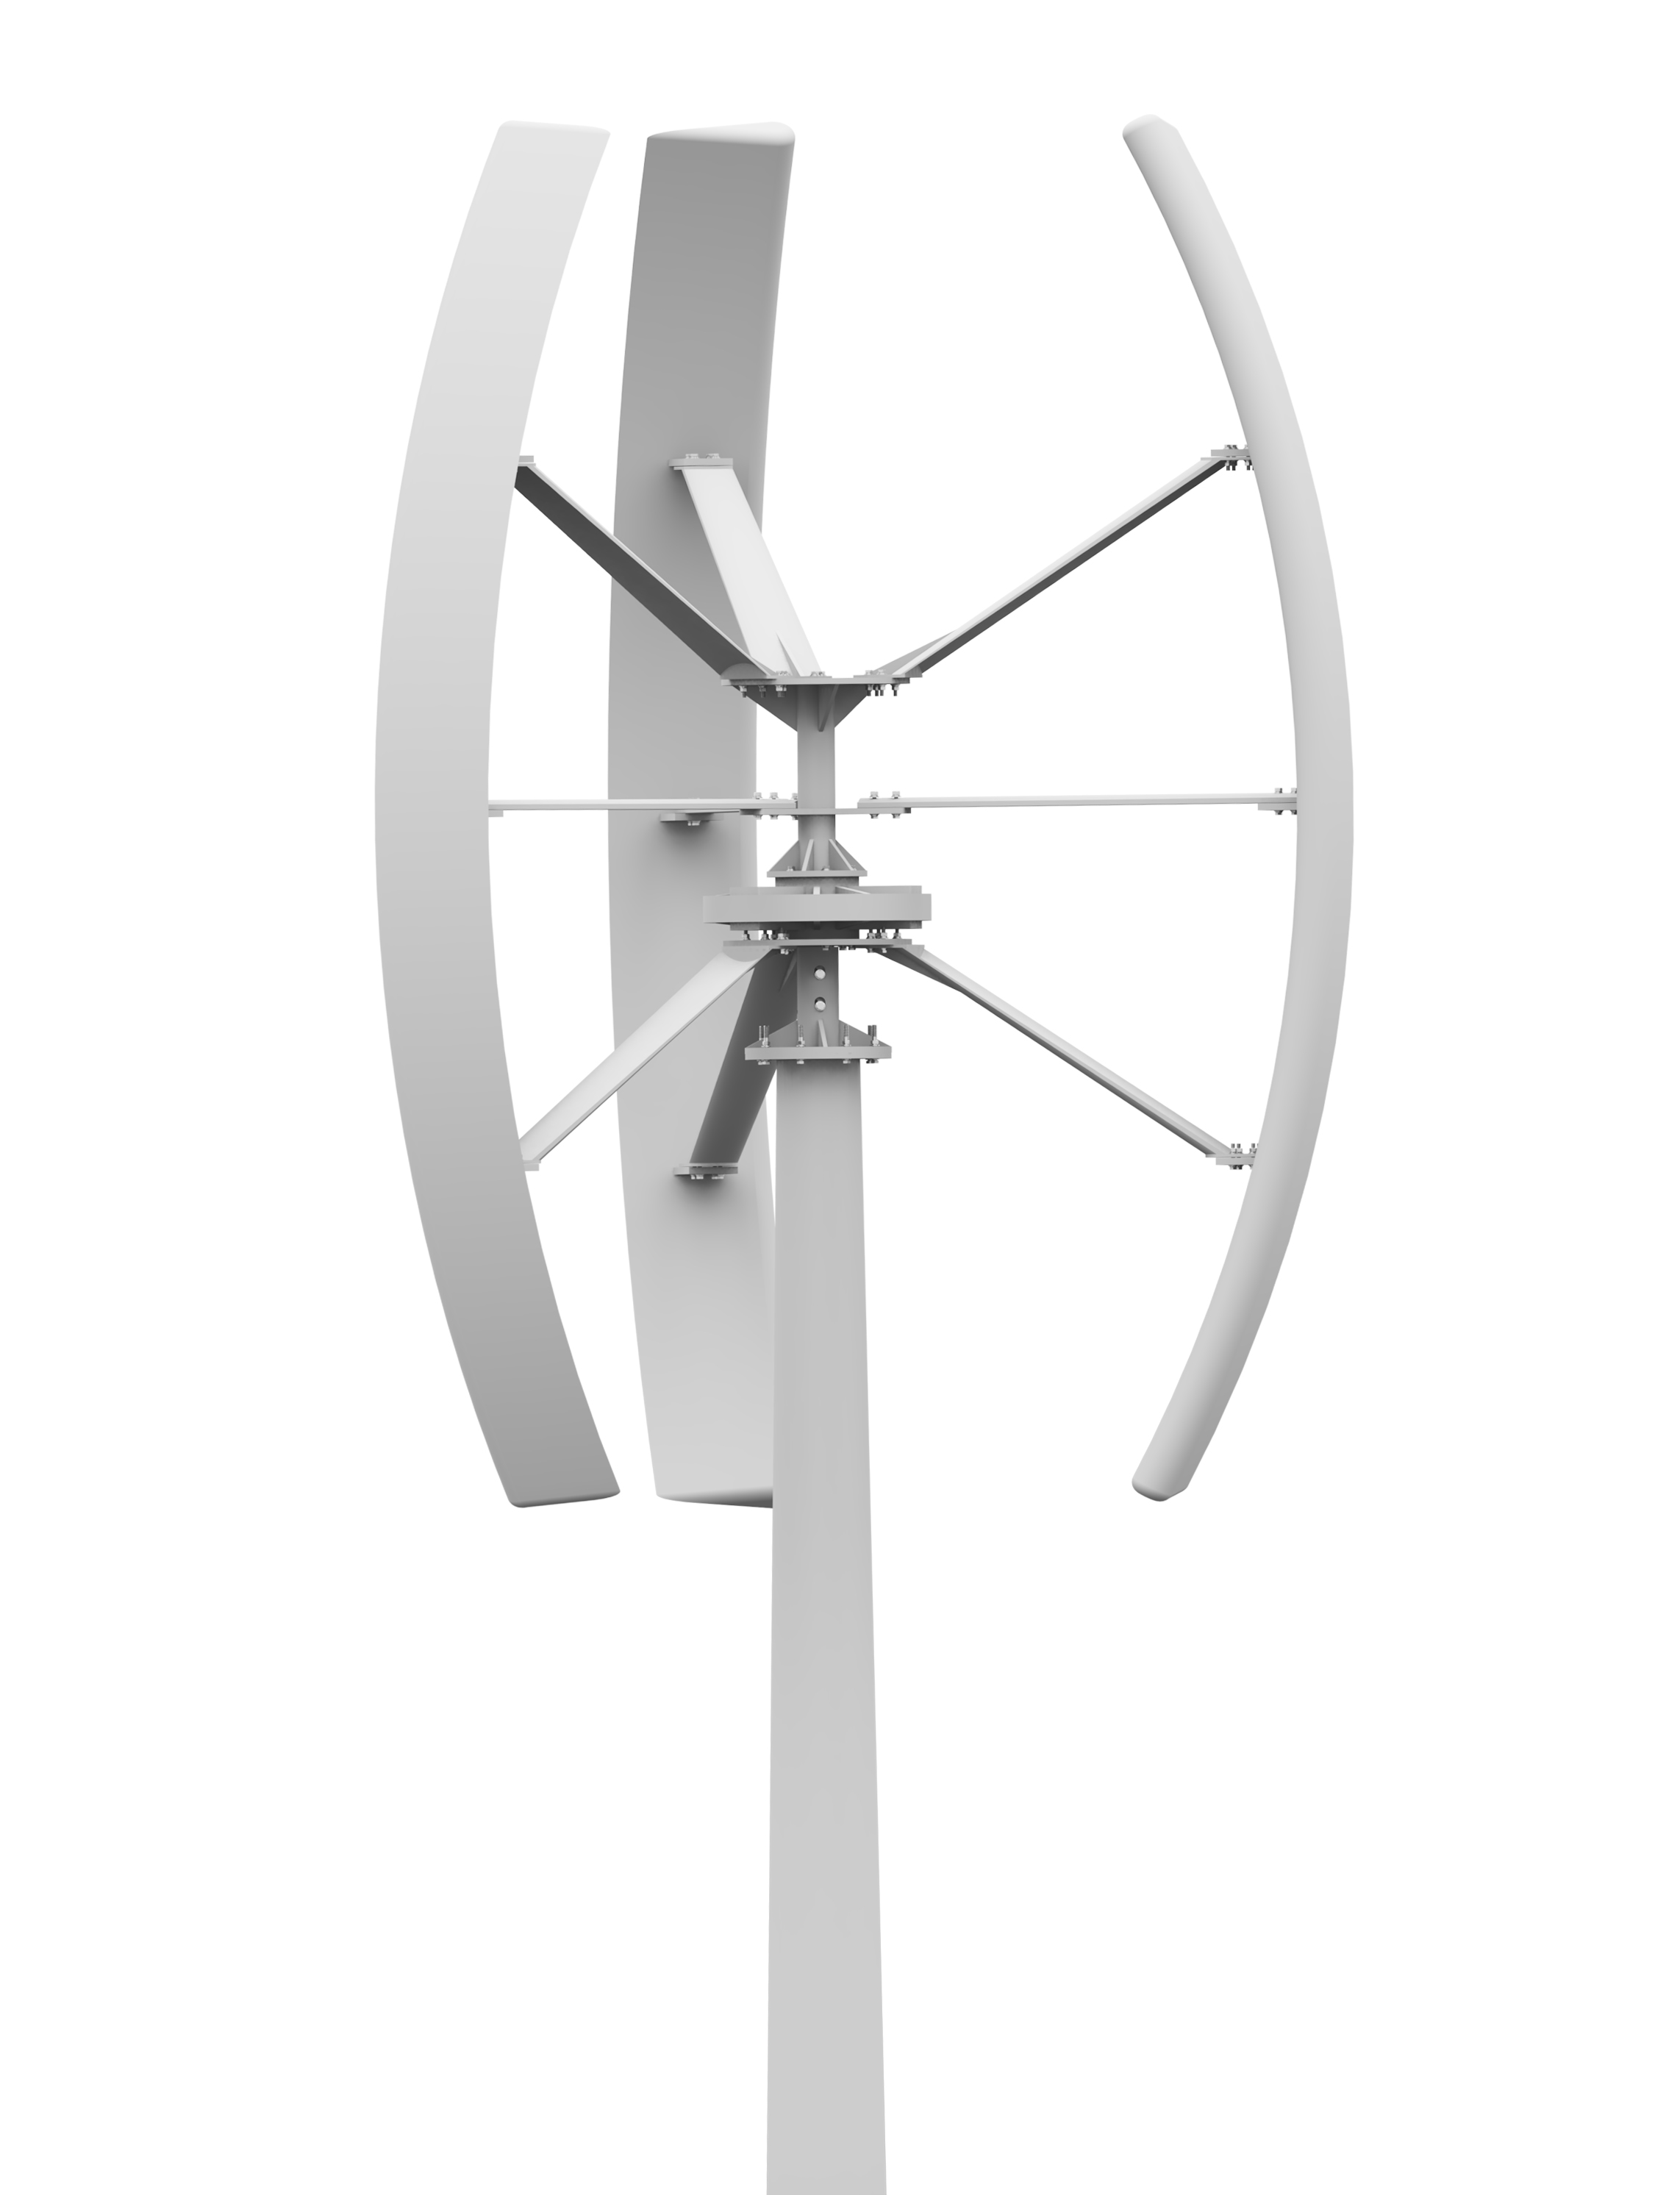 GV-3KW Vertical Axis Wind Turbine Featured Image